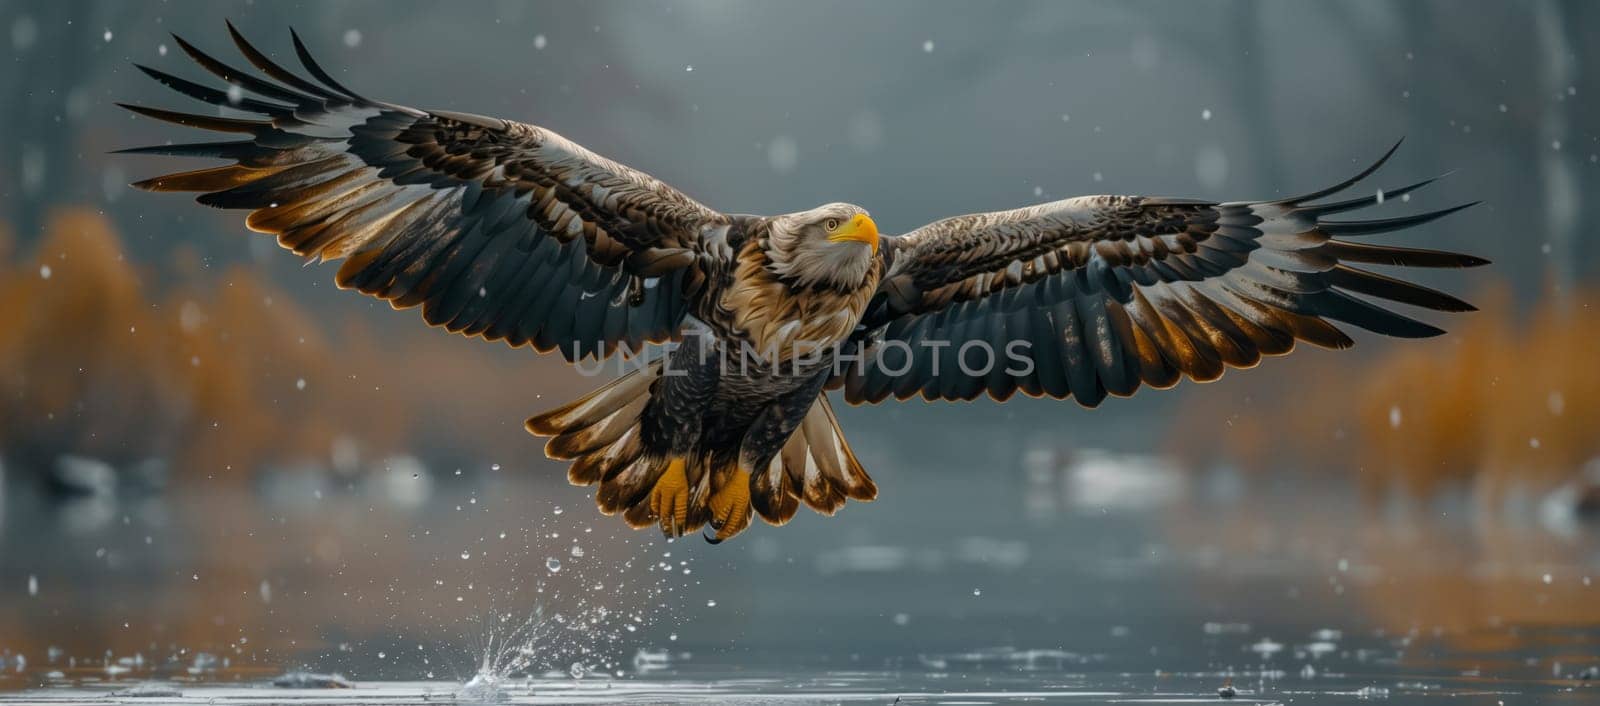 Accipitridae bird, an Eagle, soaring over water in Nature by richwolf